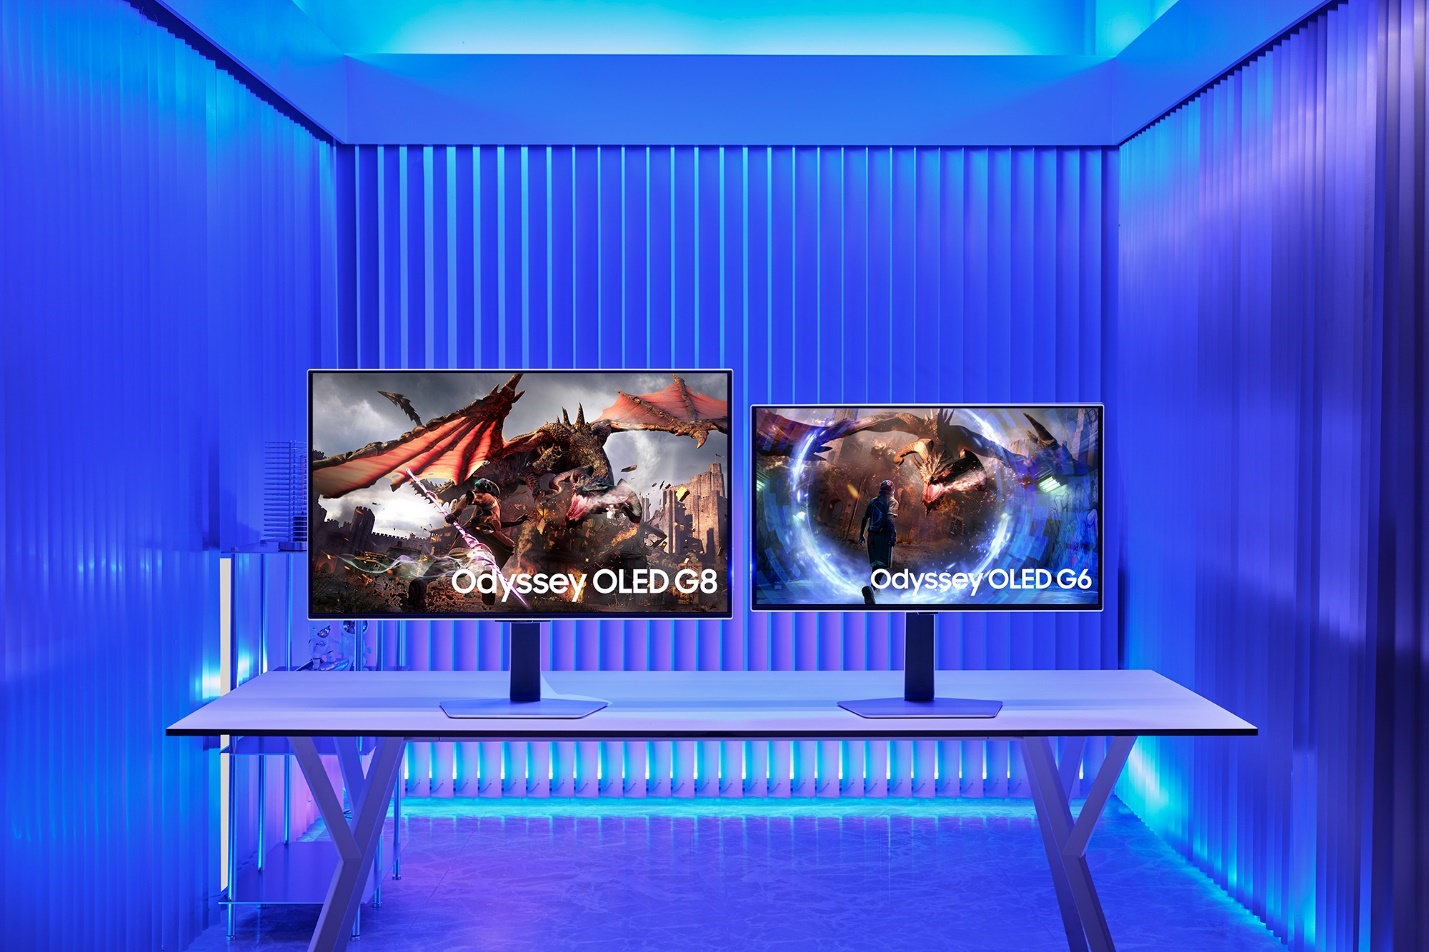 Samsung’s Odyssey OLED G8 (G80SD model) and Odyssey OLED G6 (G60SD model) gaming monitors now feature Samsung OLED Safeguard+ to prevent burn-in.